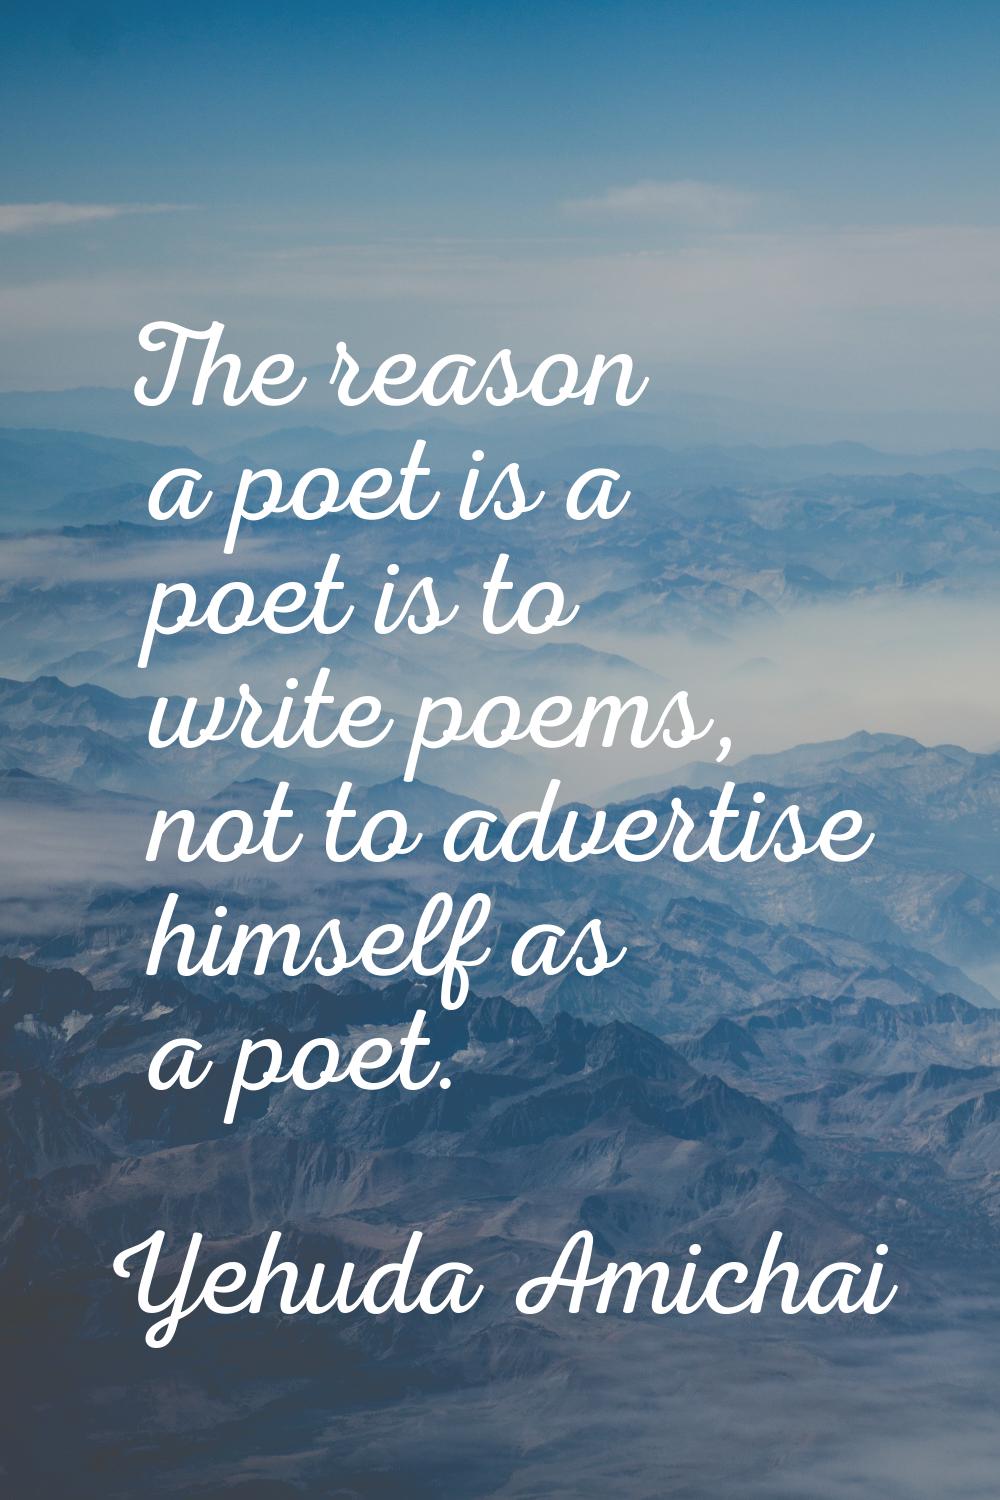 The reason a poet is a poet is to write poems, not to advertise himself as a poet.